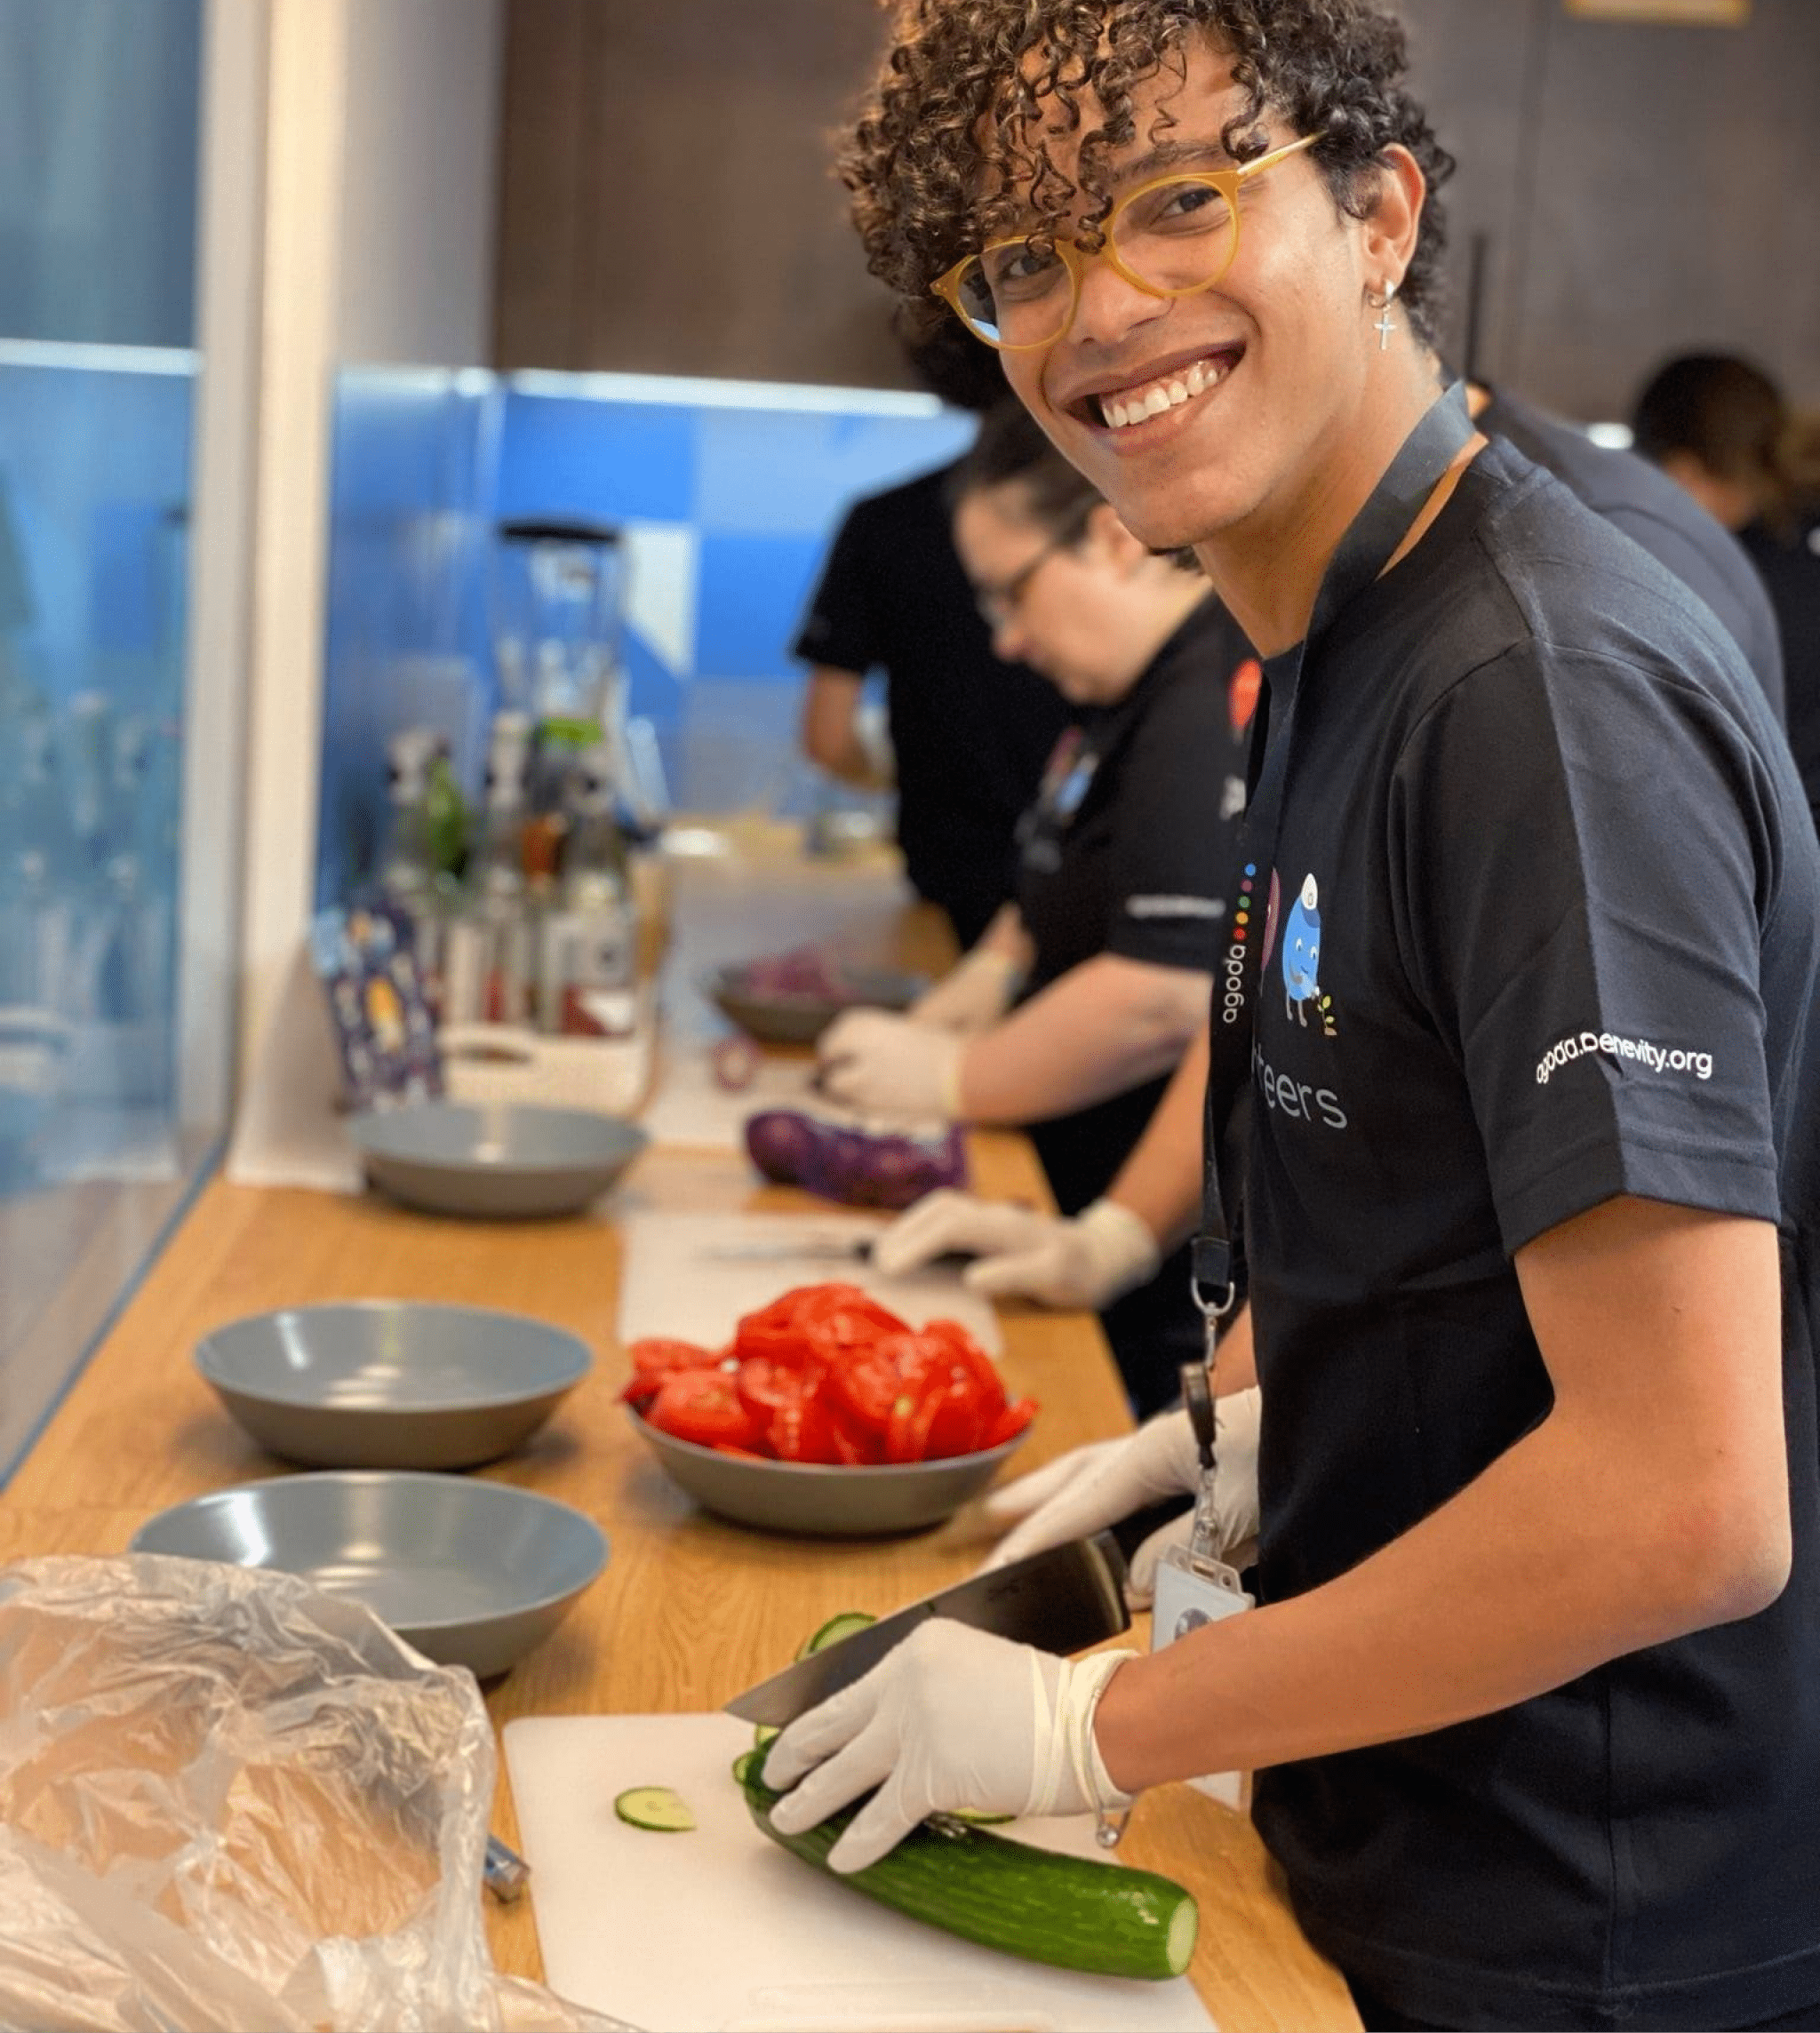 Preparing meals for a homeless shelter foundation in Budapest